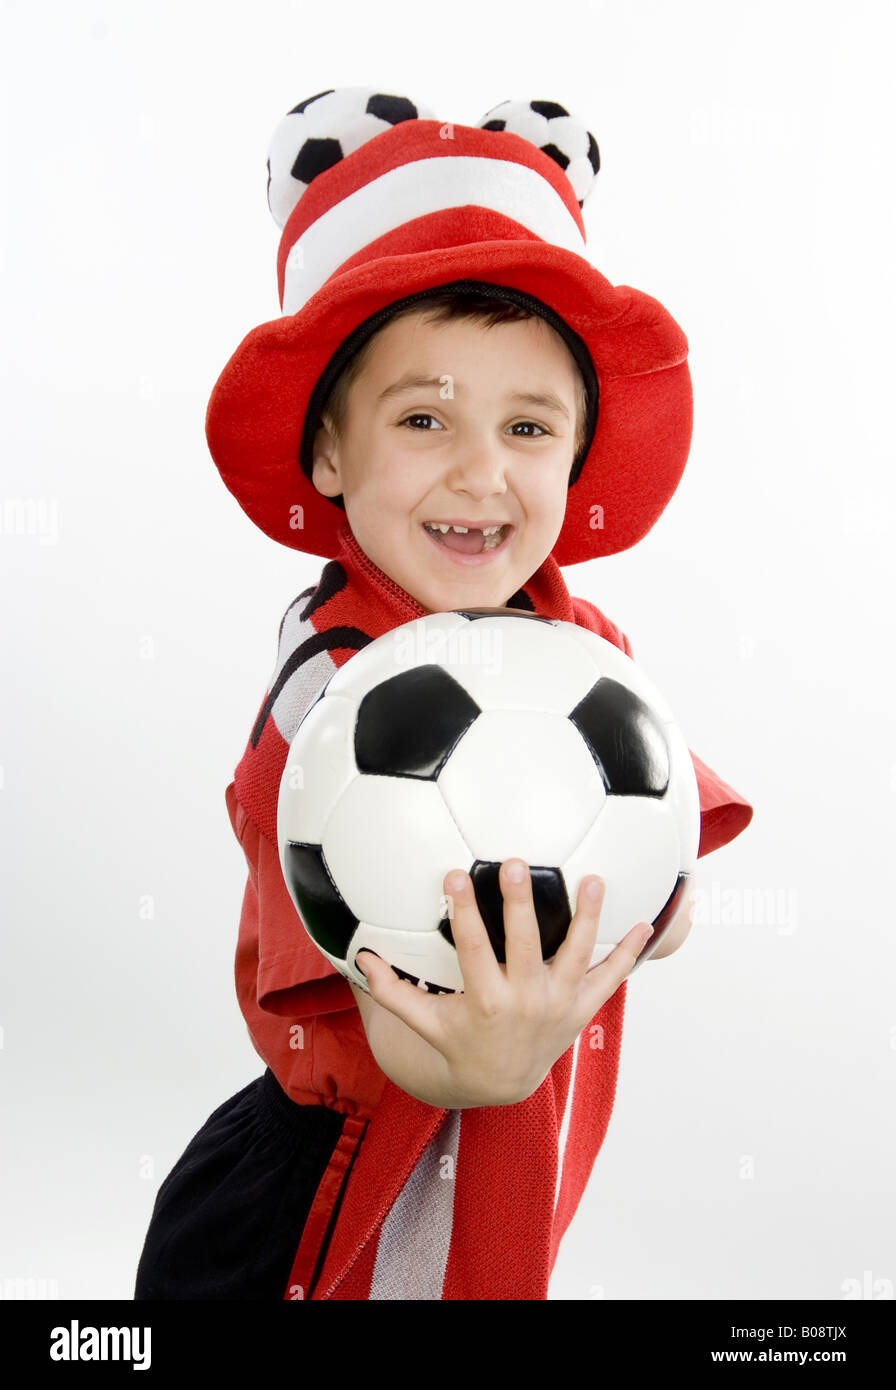 boy as Austrian soccer fan, with football and funny hat Stock Photo